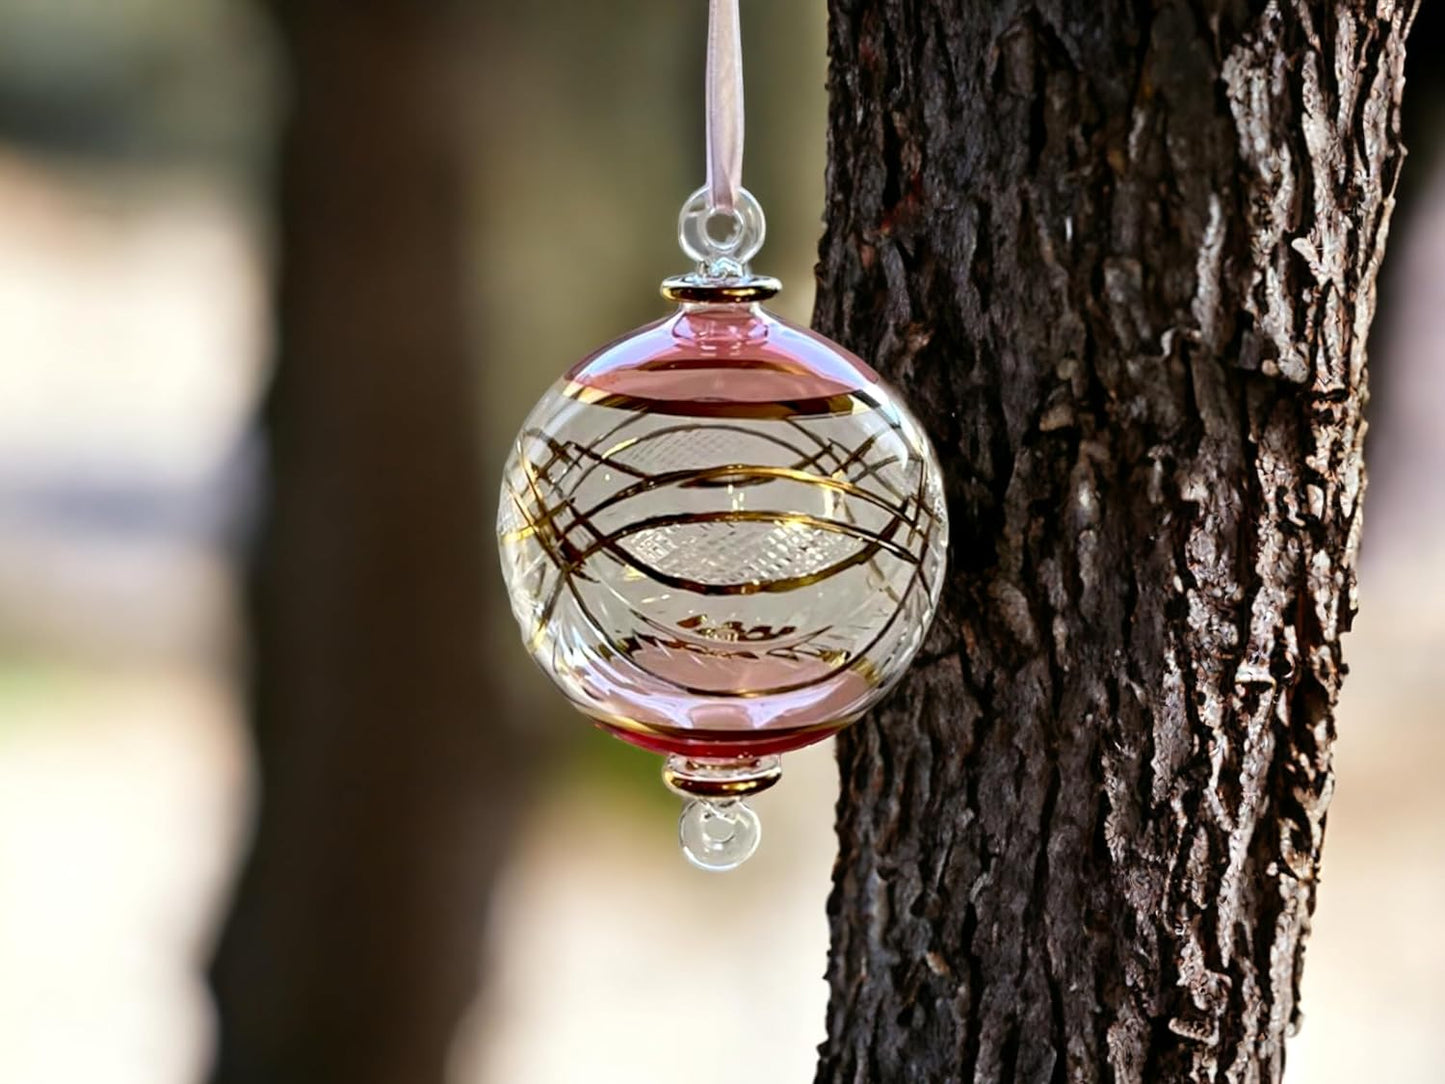 Engraved Pink and Clear Glass Christmas Ornament for Christmas Tree Decorations - Les Trois Pyramides